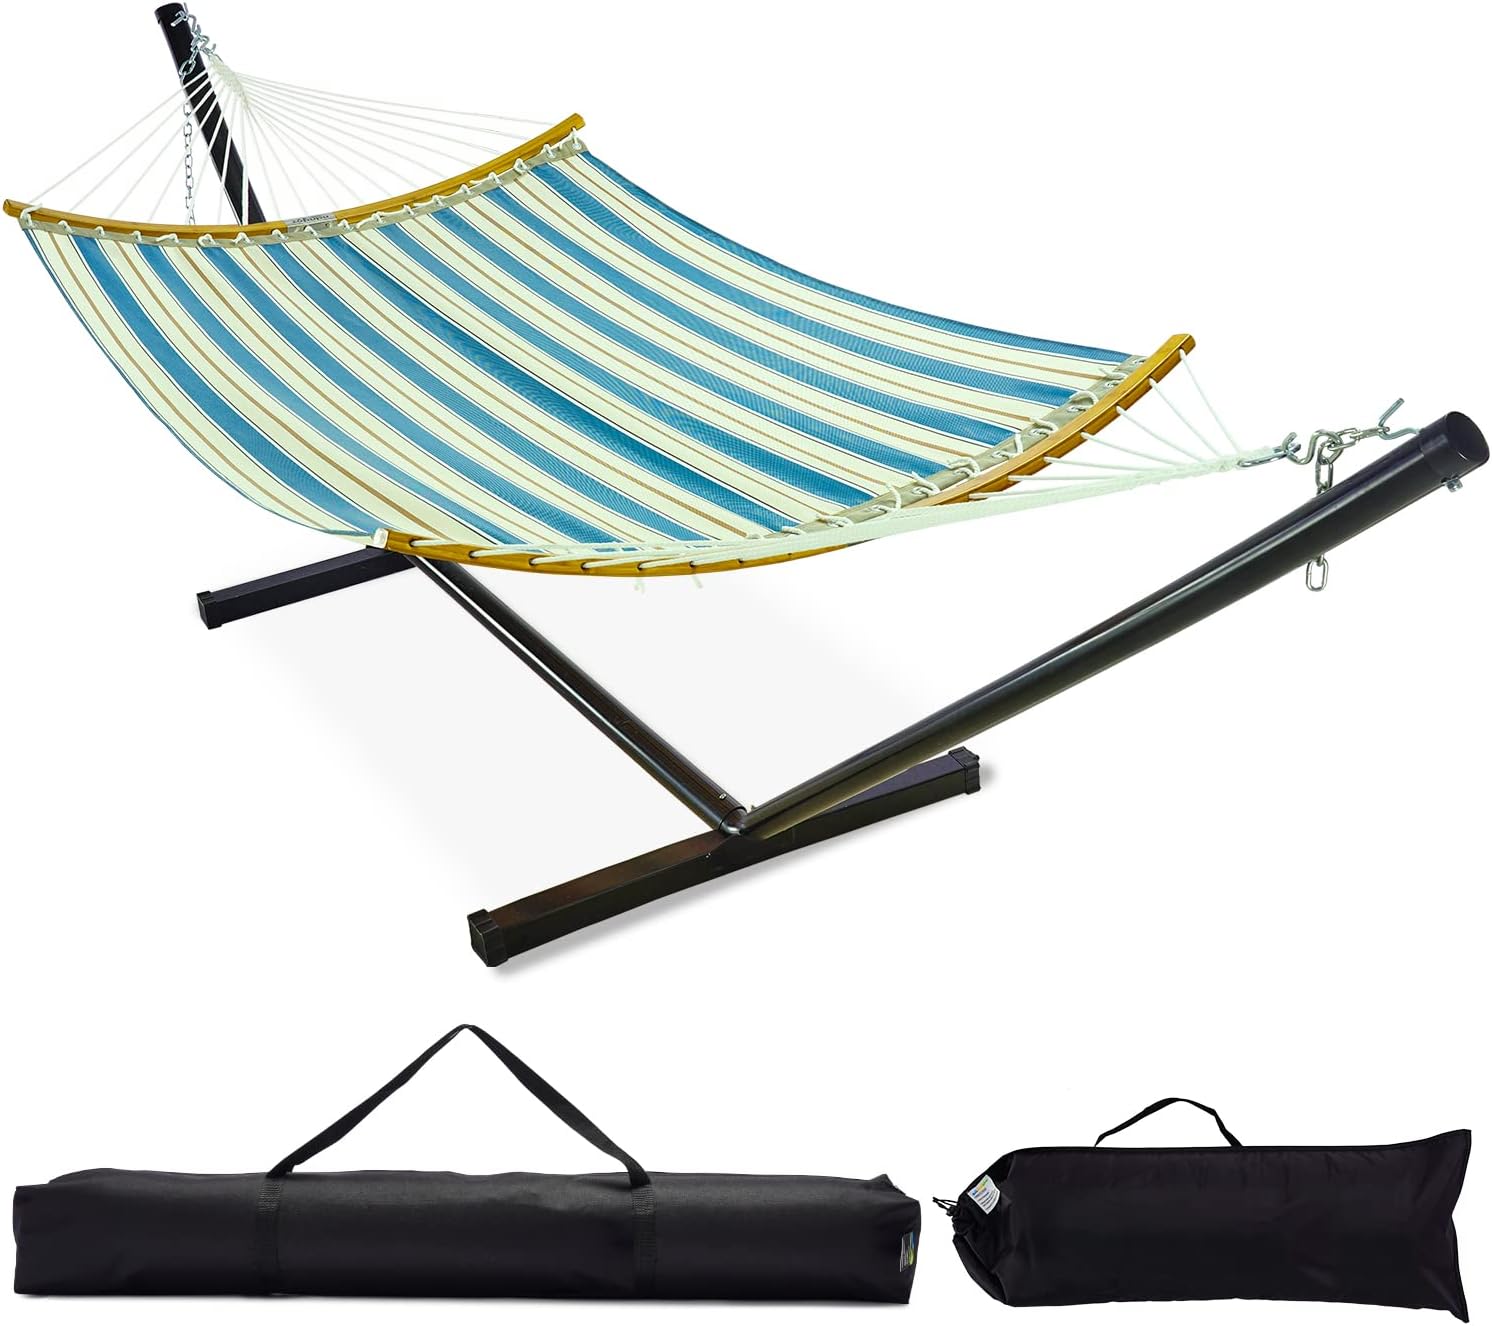 【FREE GIFT】12 FT Quick Dry Hammock with Stand